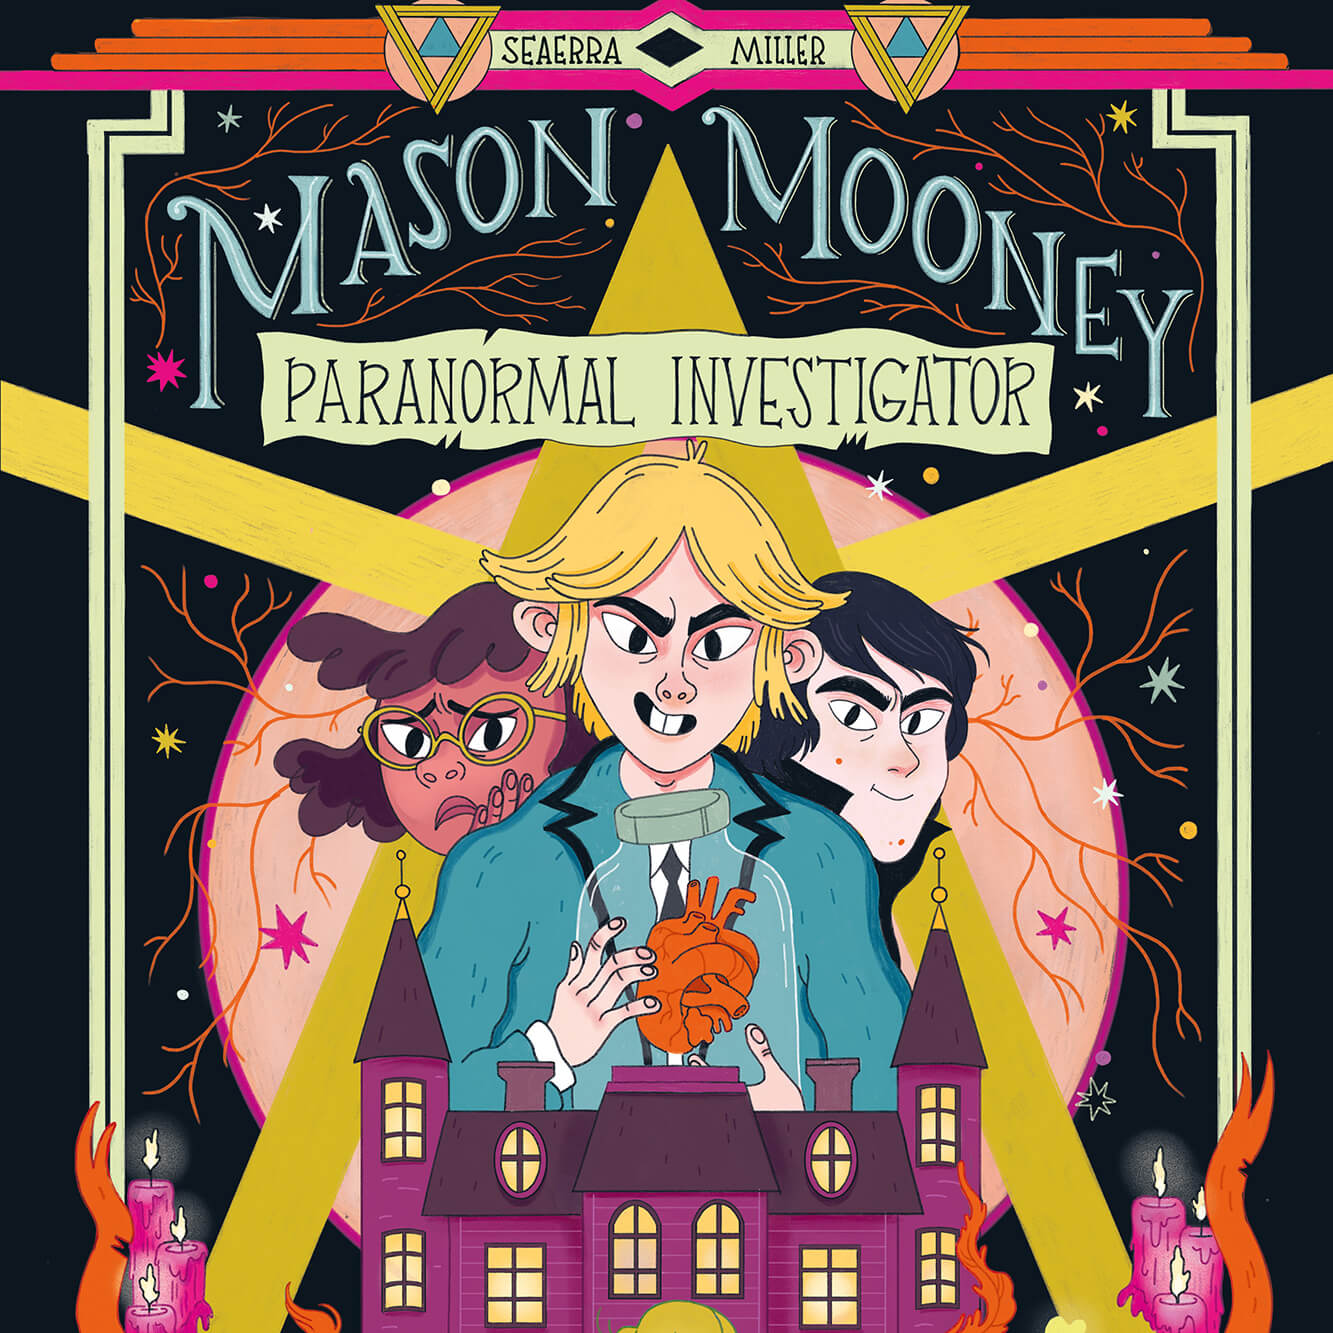 Image of the book cover for "Mason Mooney Paranormal Investigator."